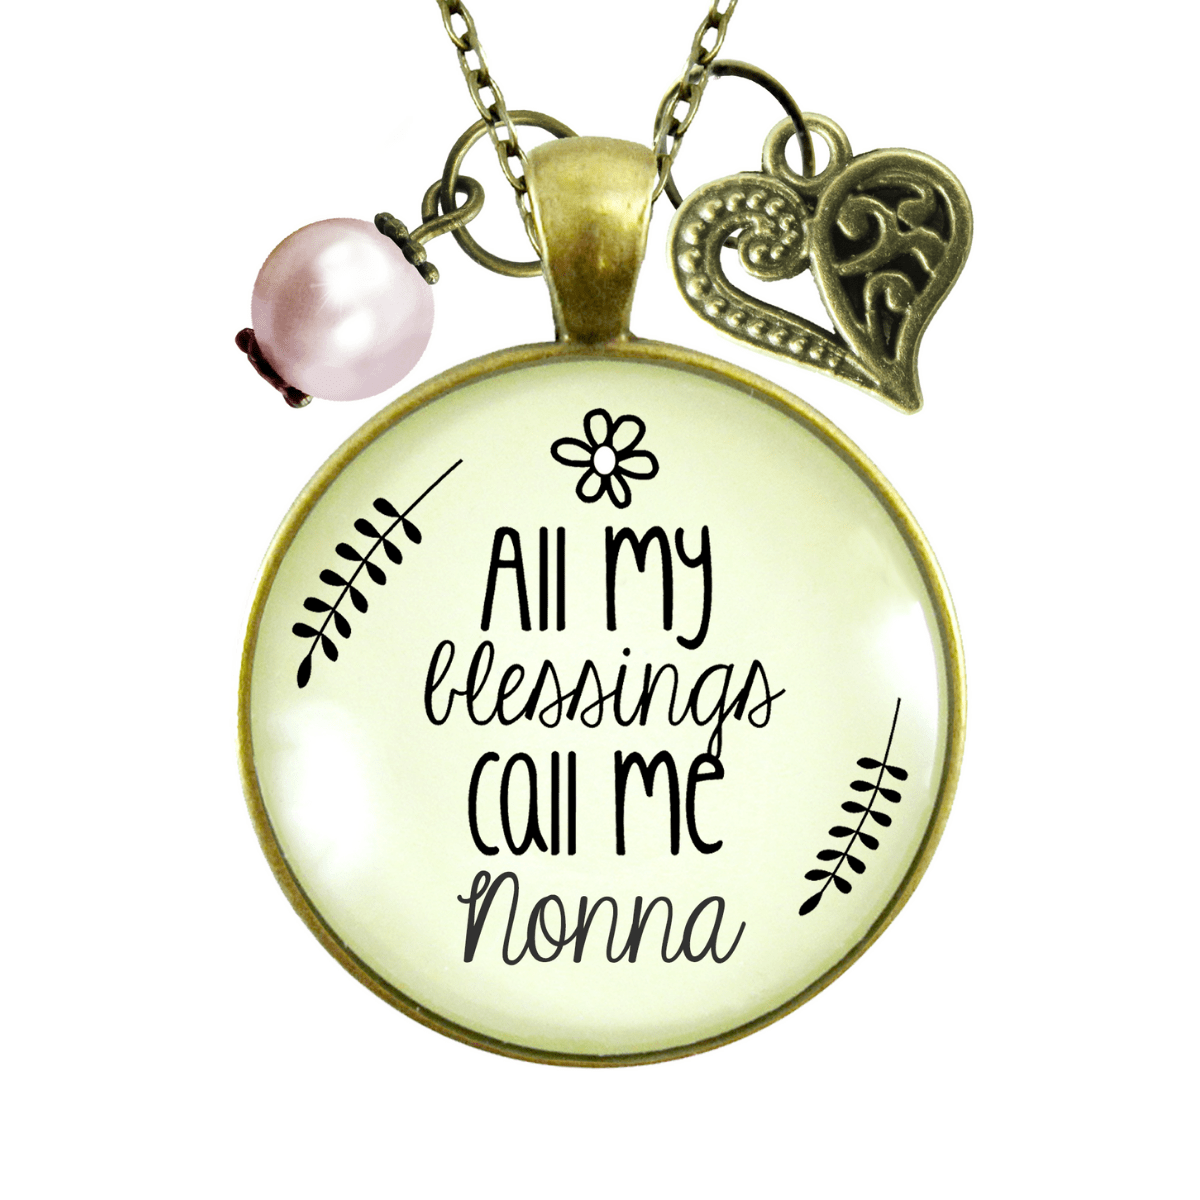 Gutsy Goodness Nonna Necklace All My Blessings Italian Grandma Womens Family Gift Jewelry - Gutsy Goodness Handmade Jewelry;Nonna Necklace All My Blessings Italian Grandma Womens Family Gift Jewelry - Gutsy Goodness Handmade Jewelry Gifts